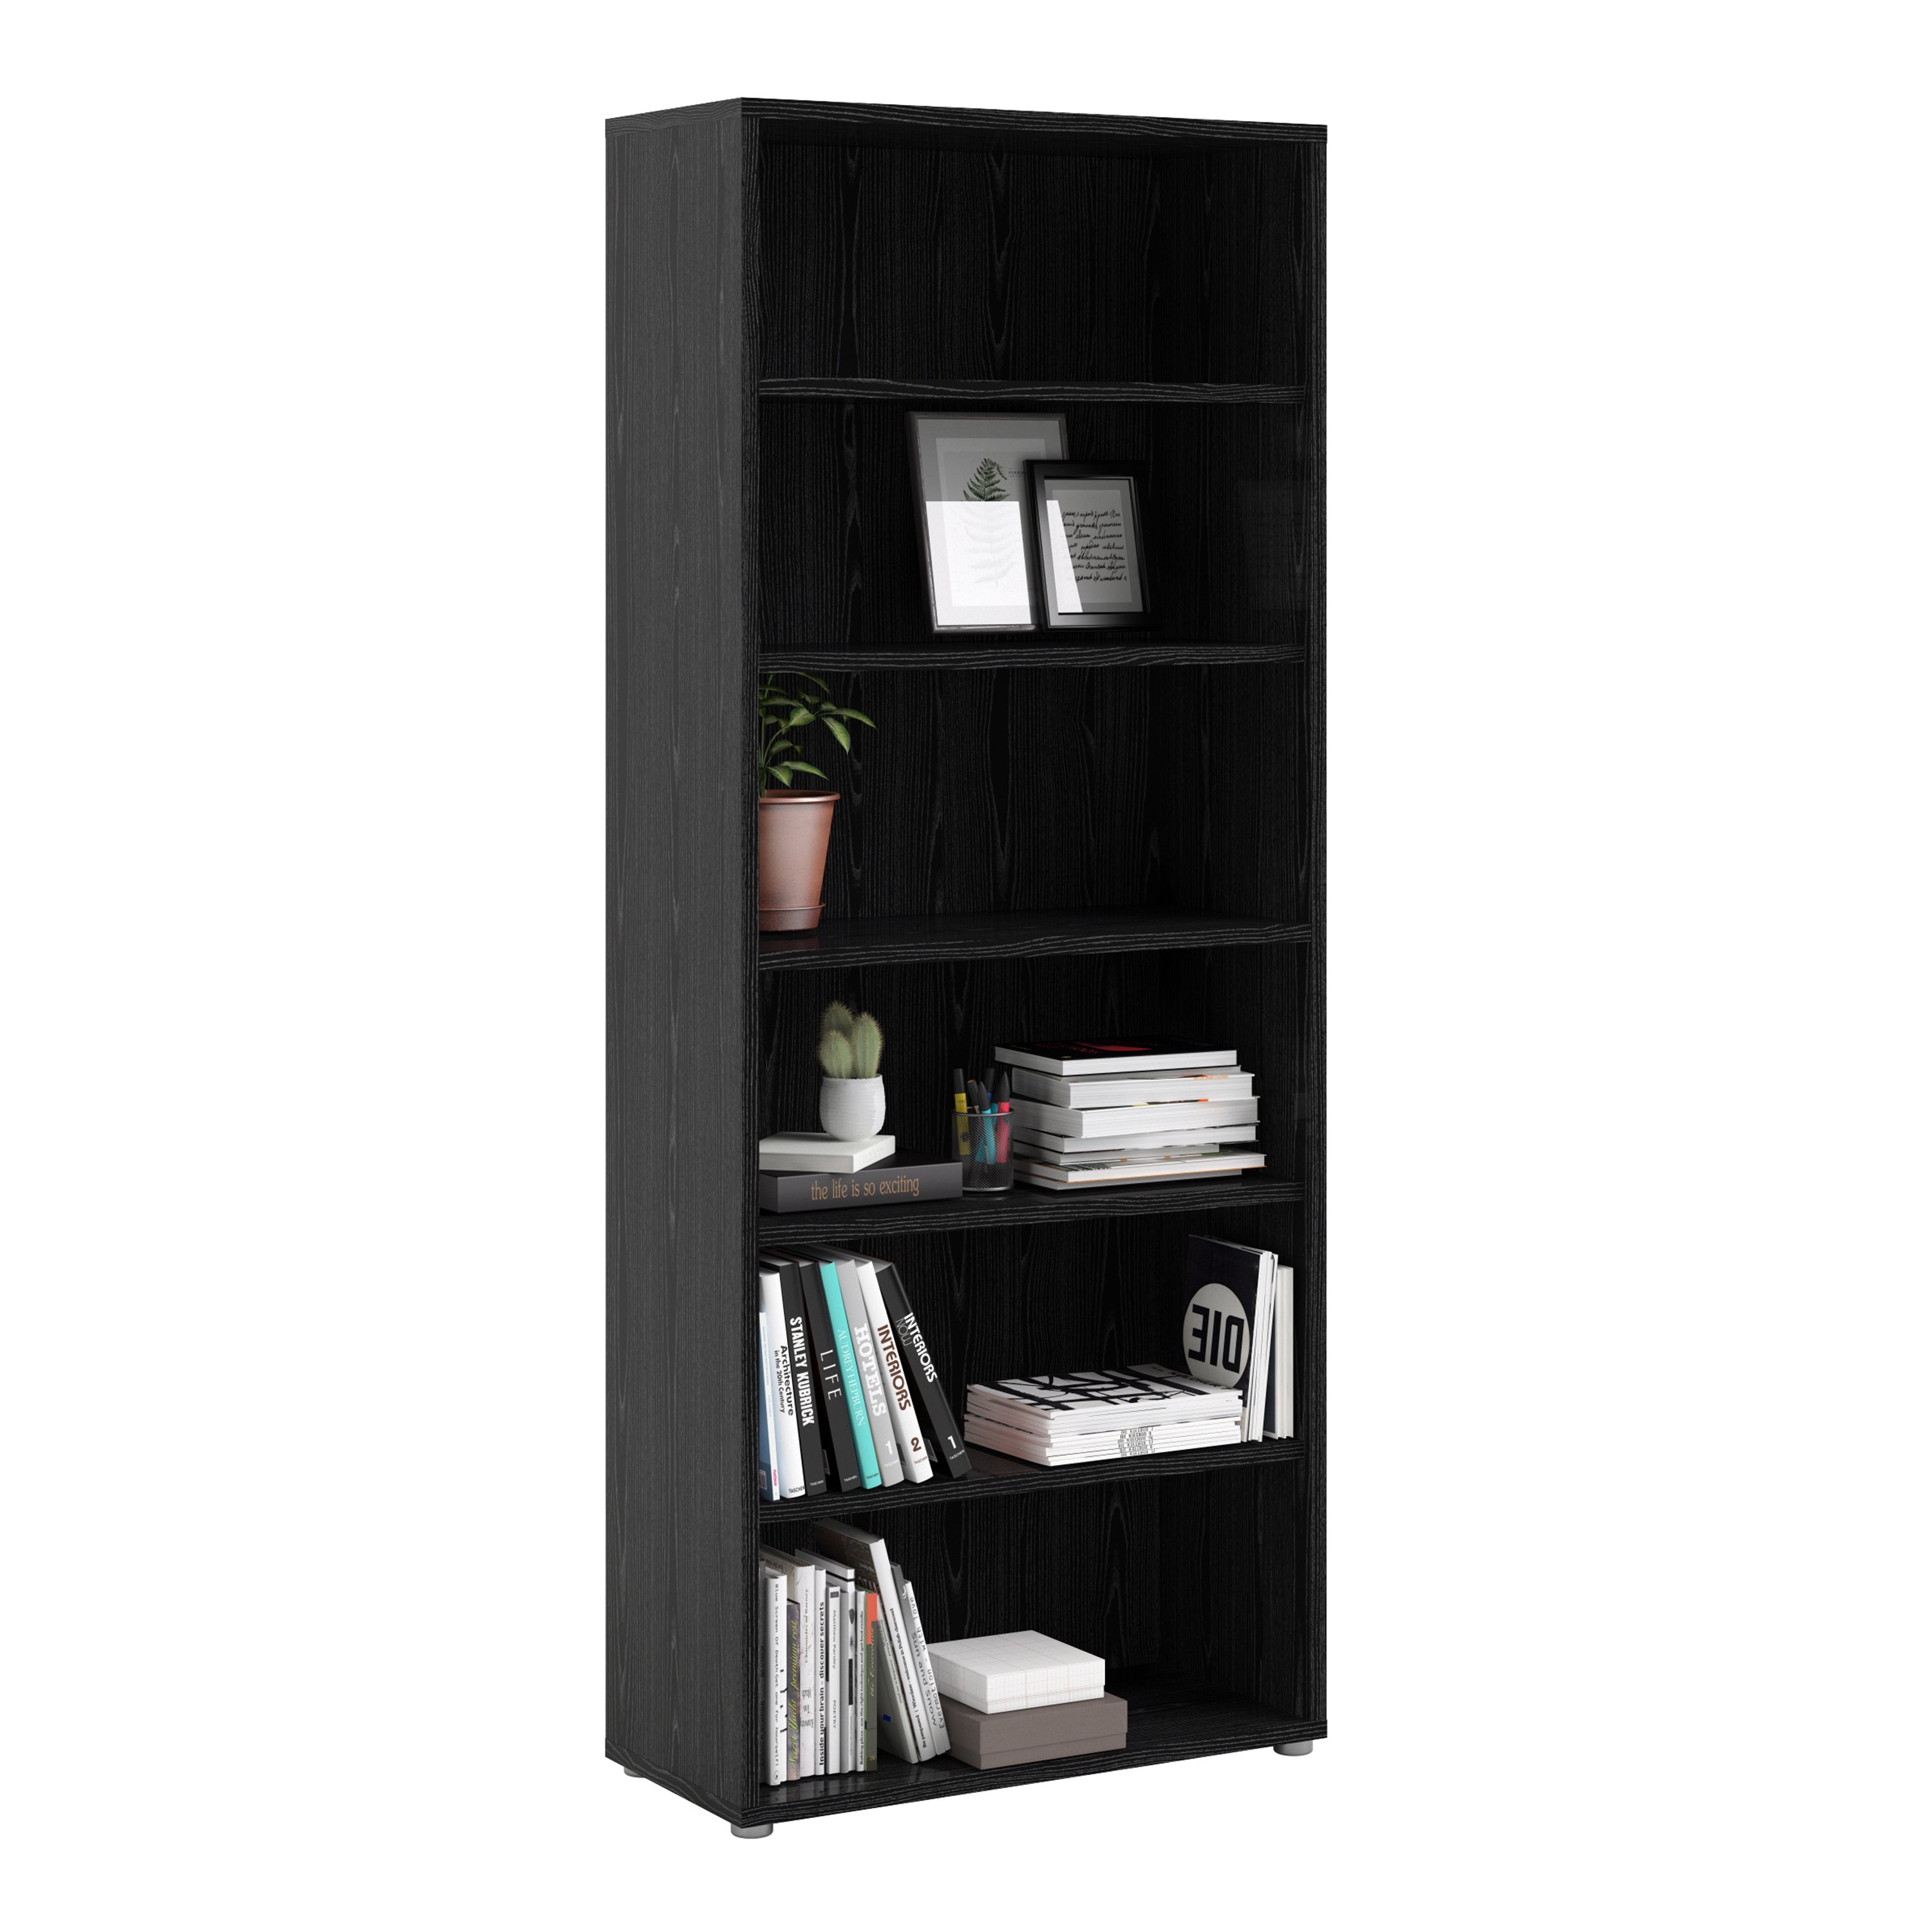 Image of Prima Bookcase 5 Shelves - Available In 3 Colours